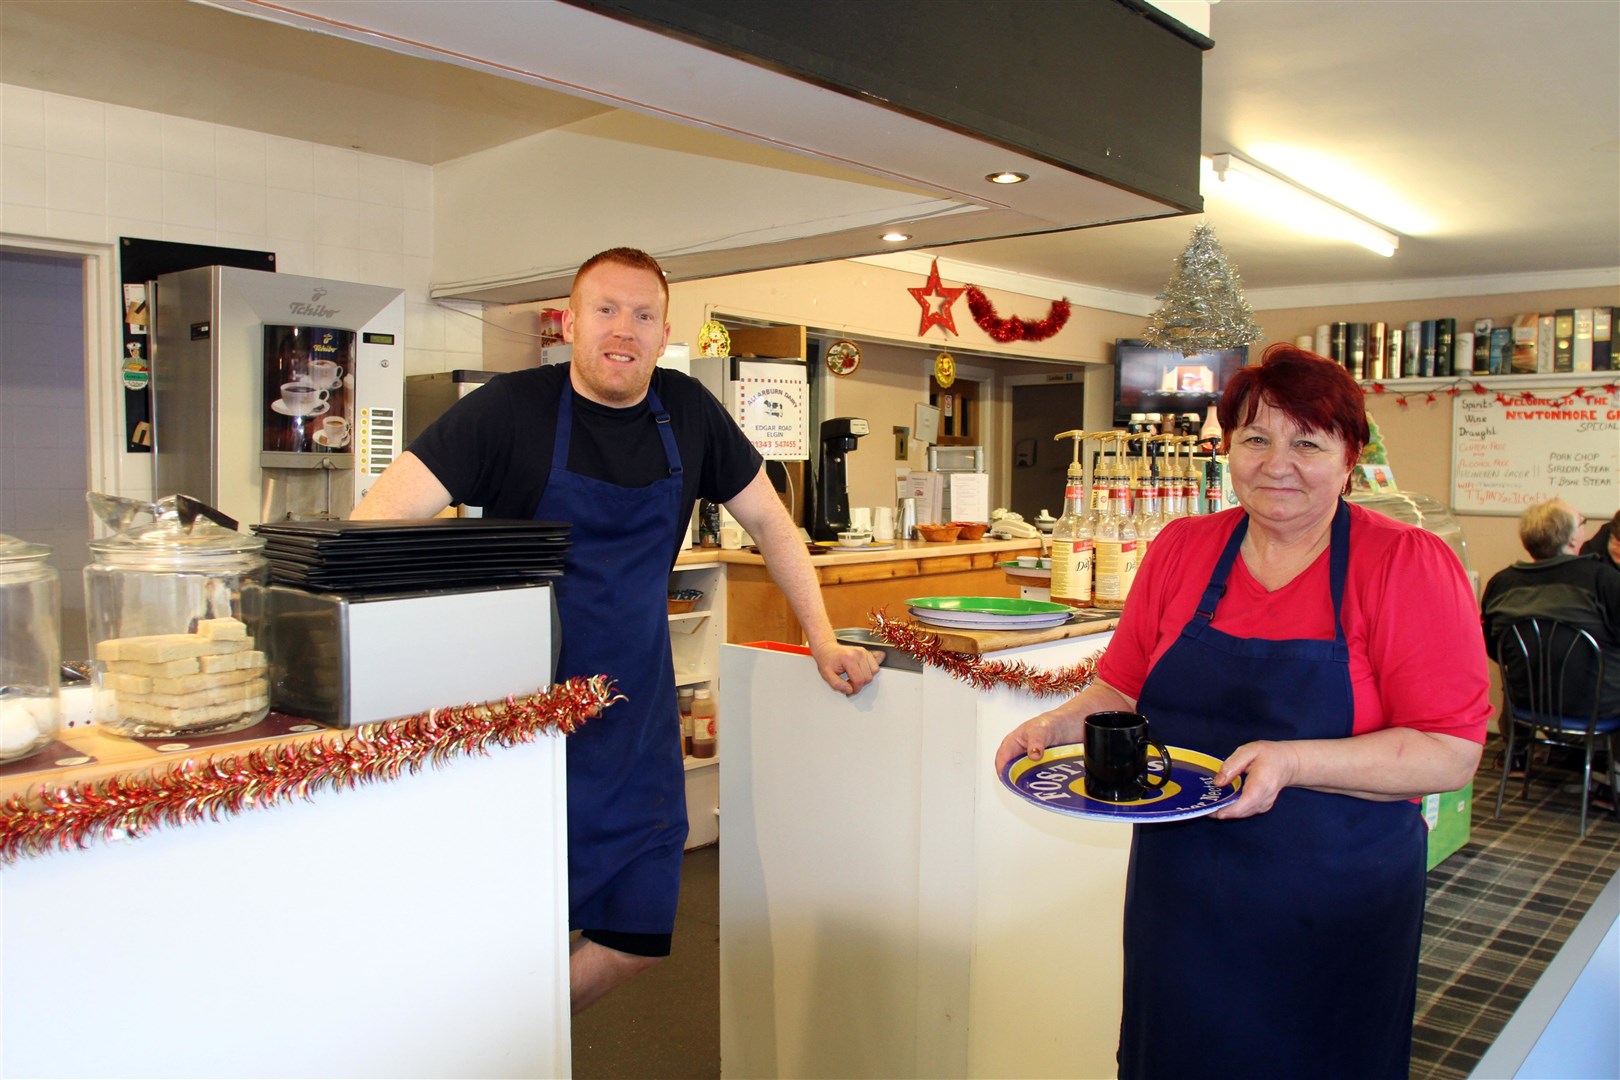 Staff members Iain Hampton and Margarita Clybotary at The Grill on the outskirts of Newtonmore.